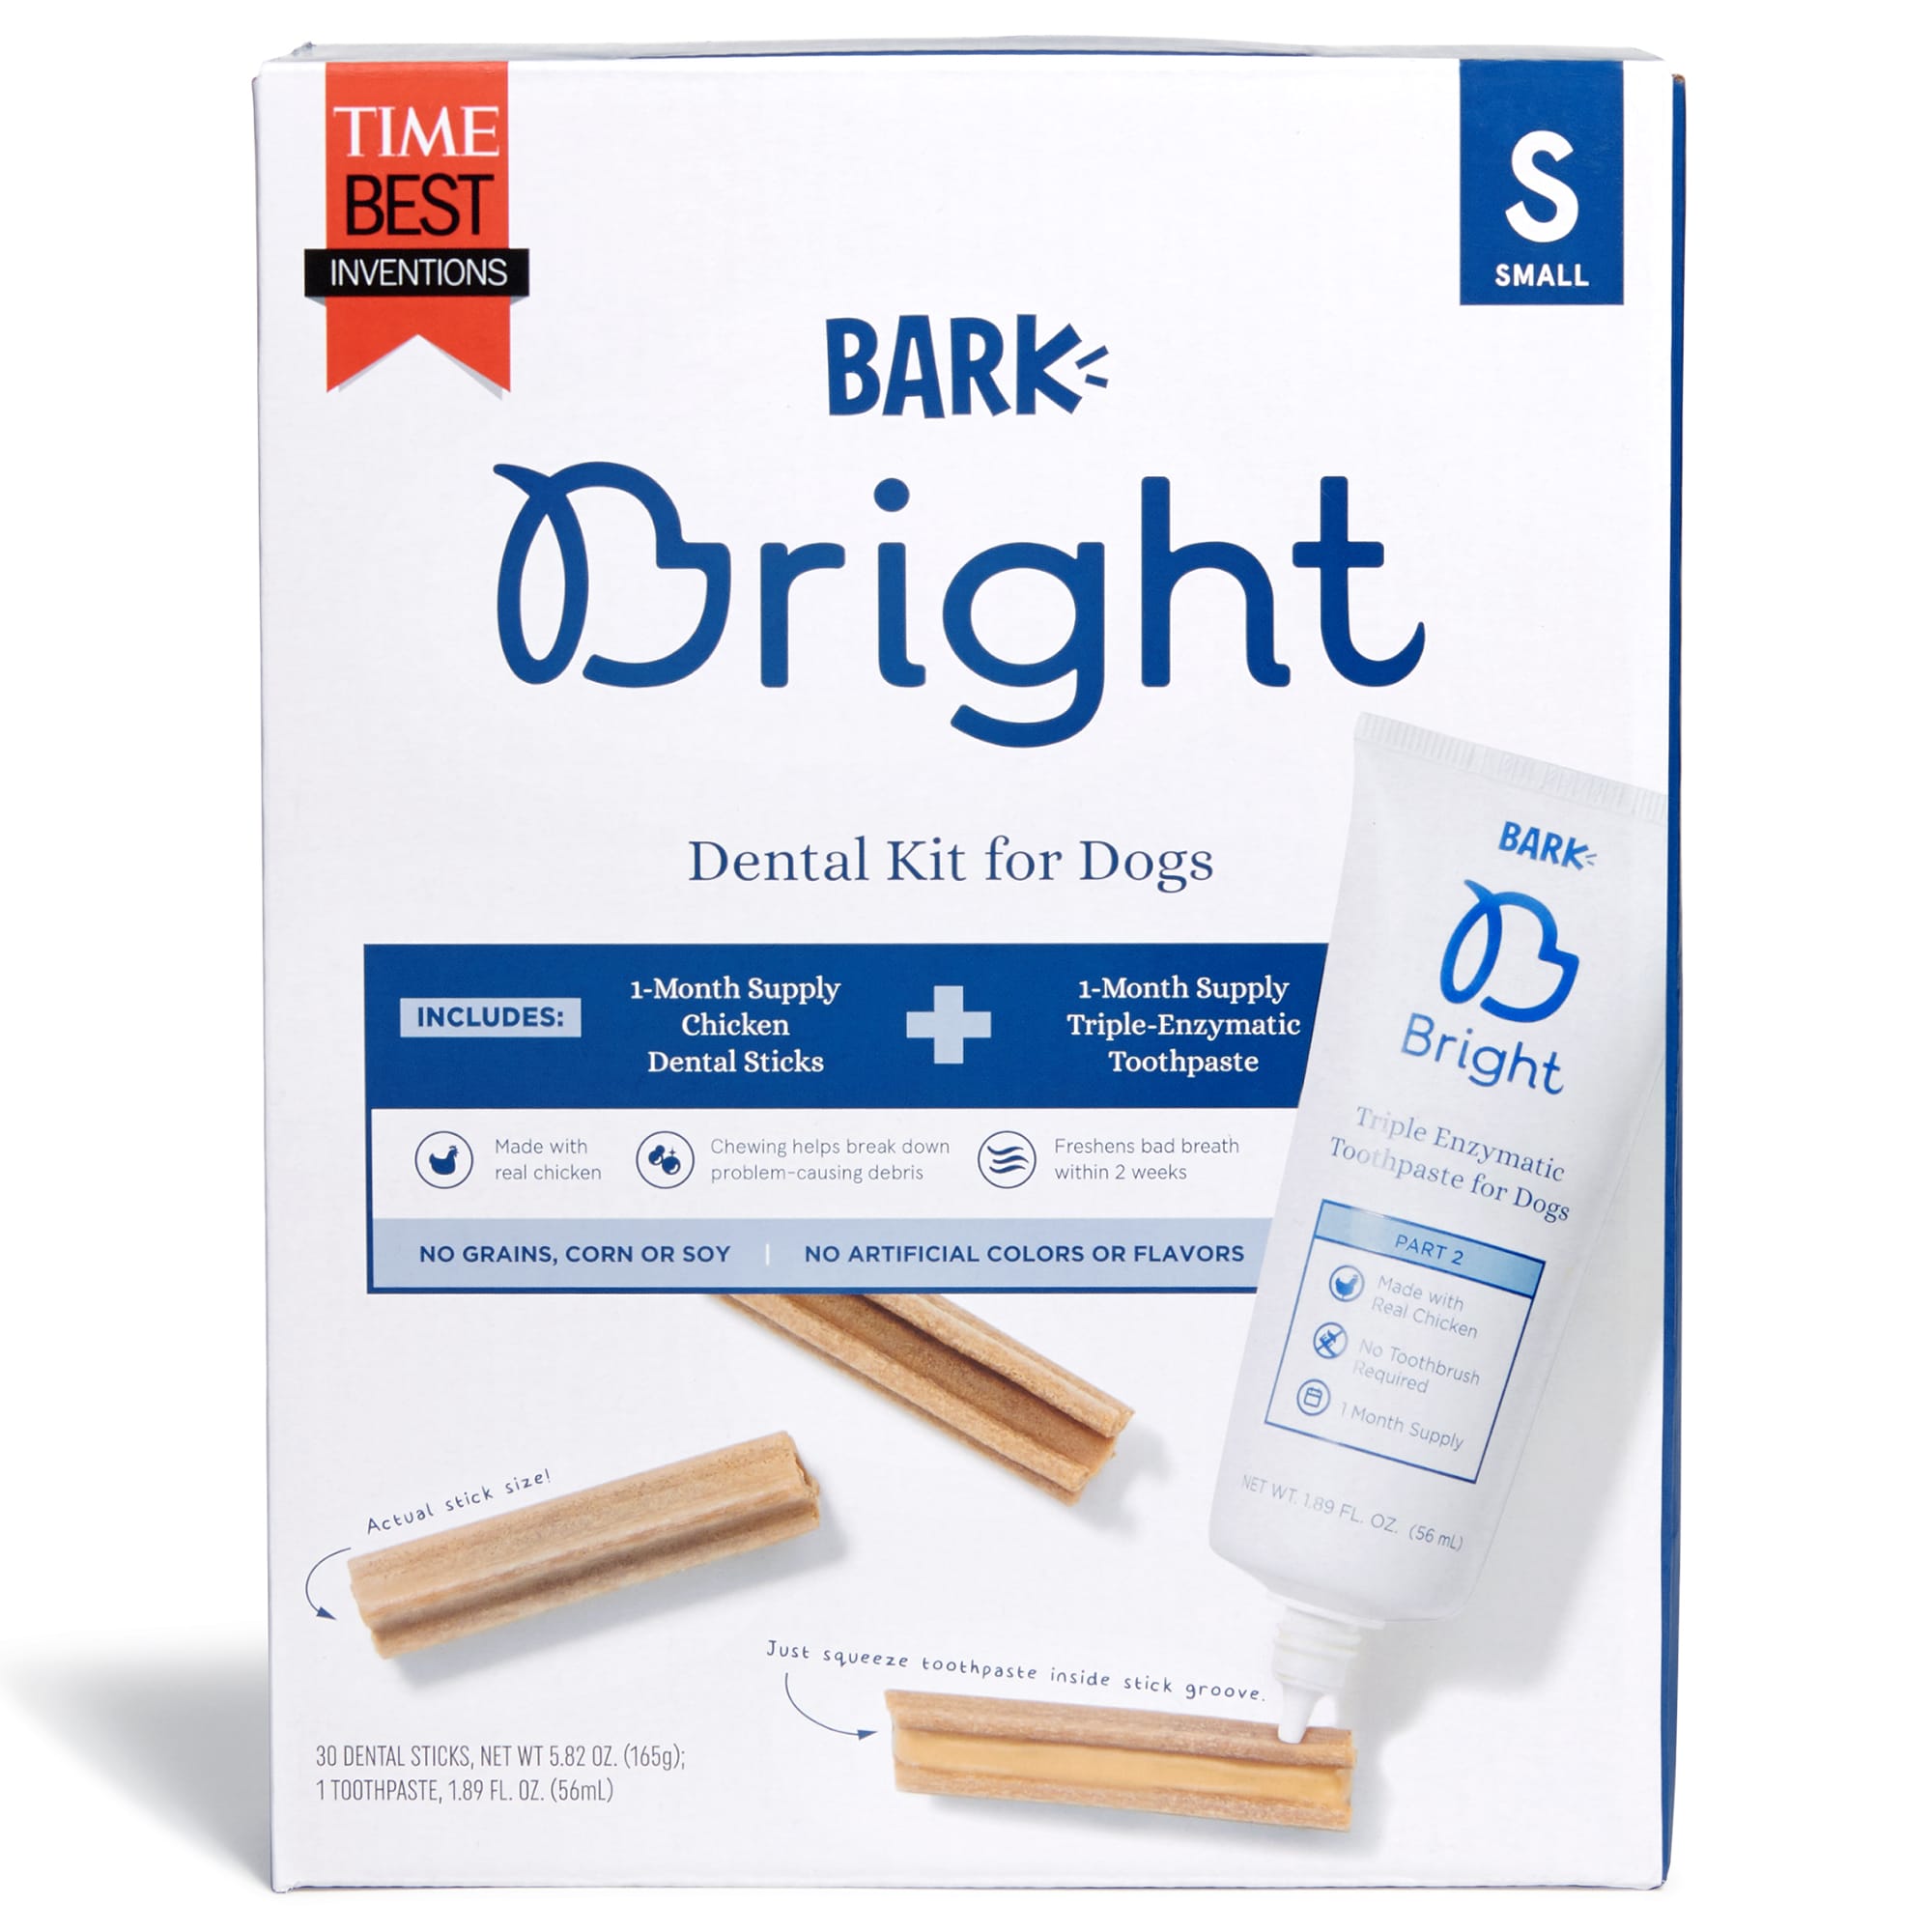 BARK Bright Small Dental Kit for Dogs, 7.71 oz., Count of 30